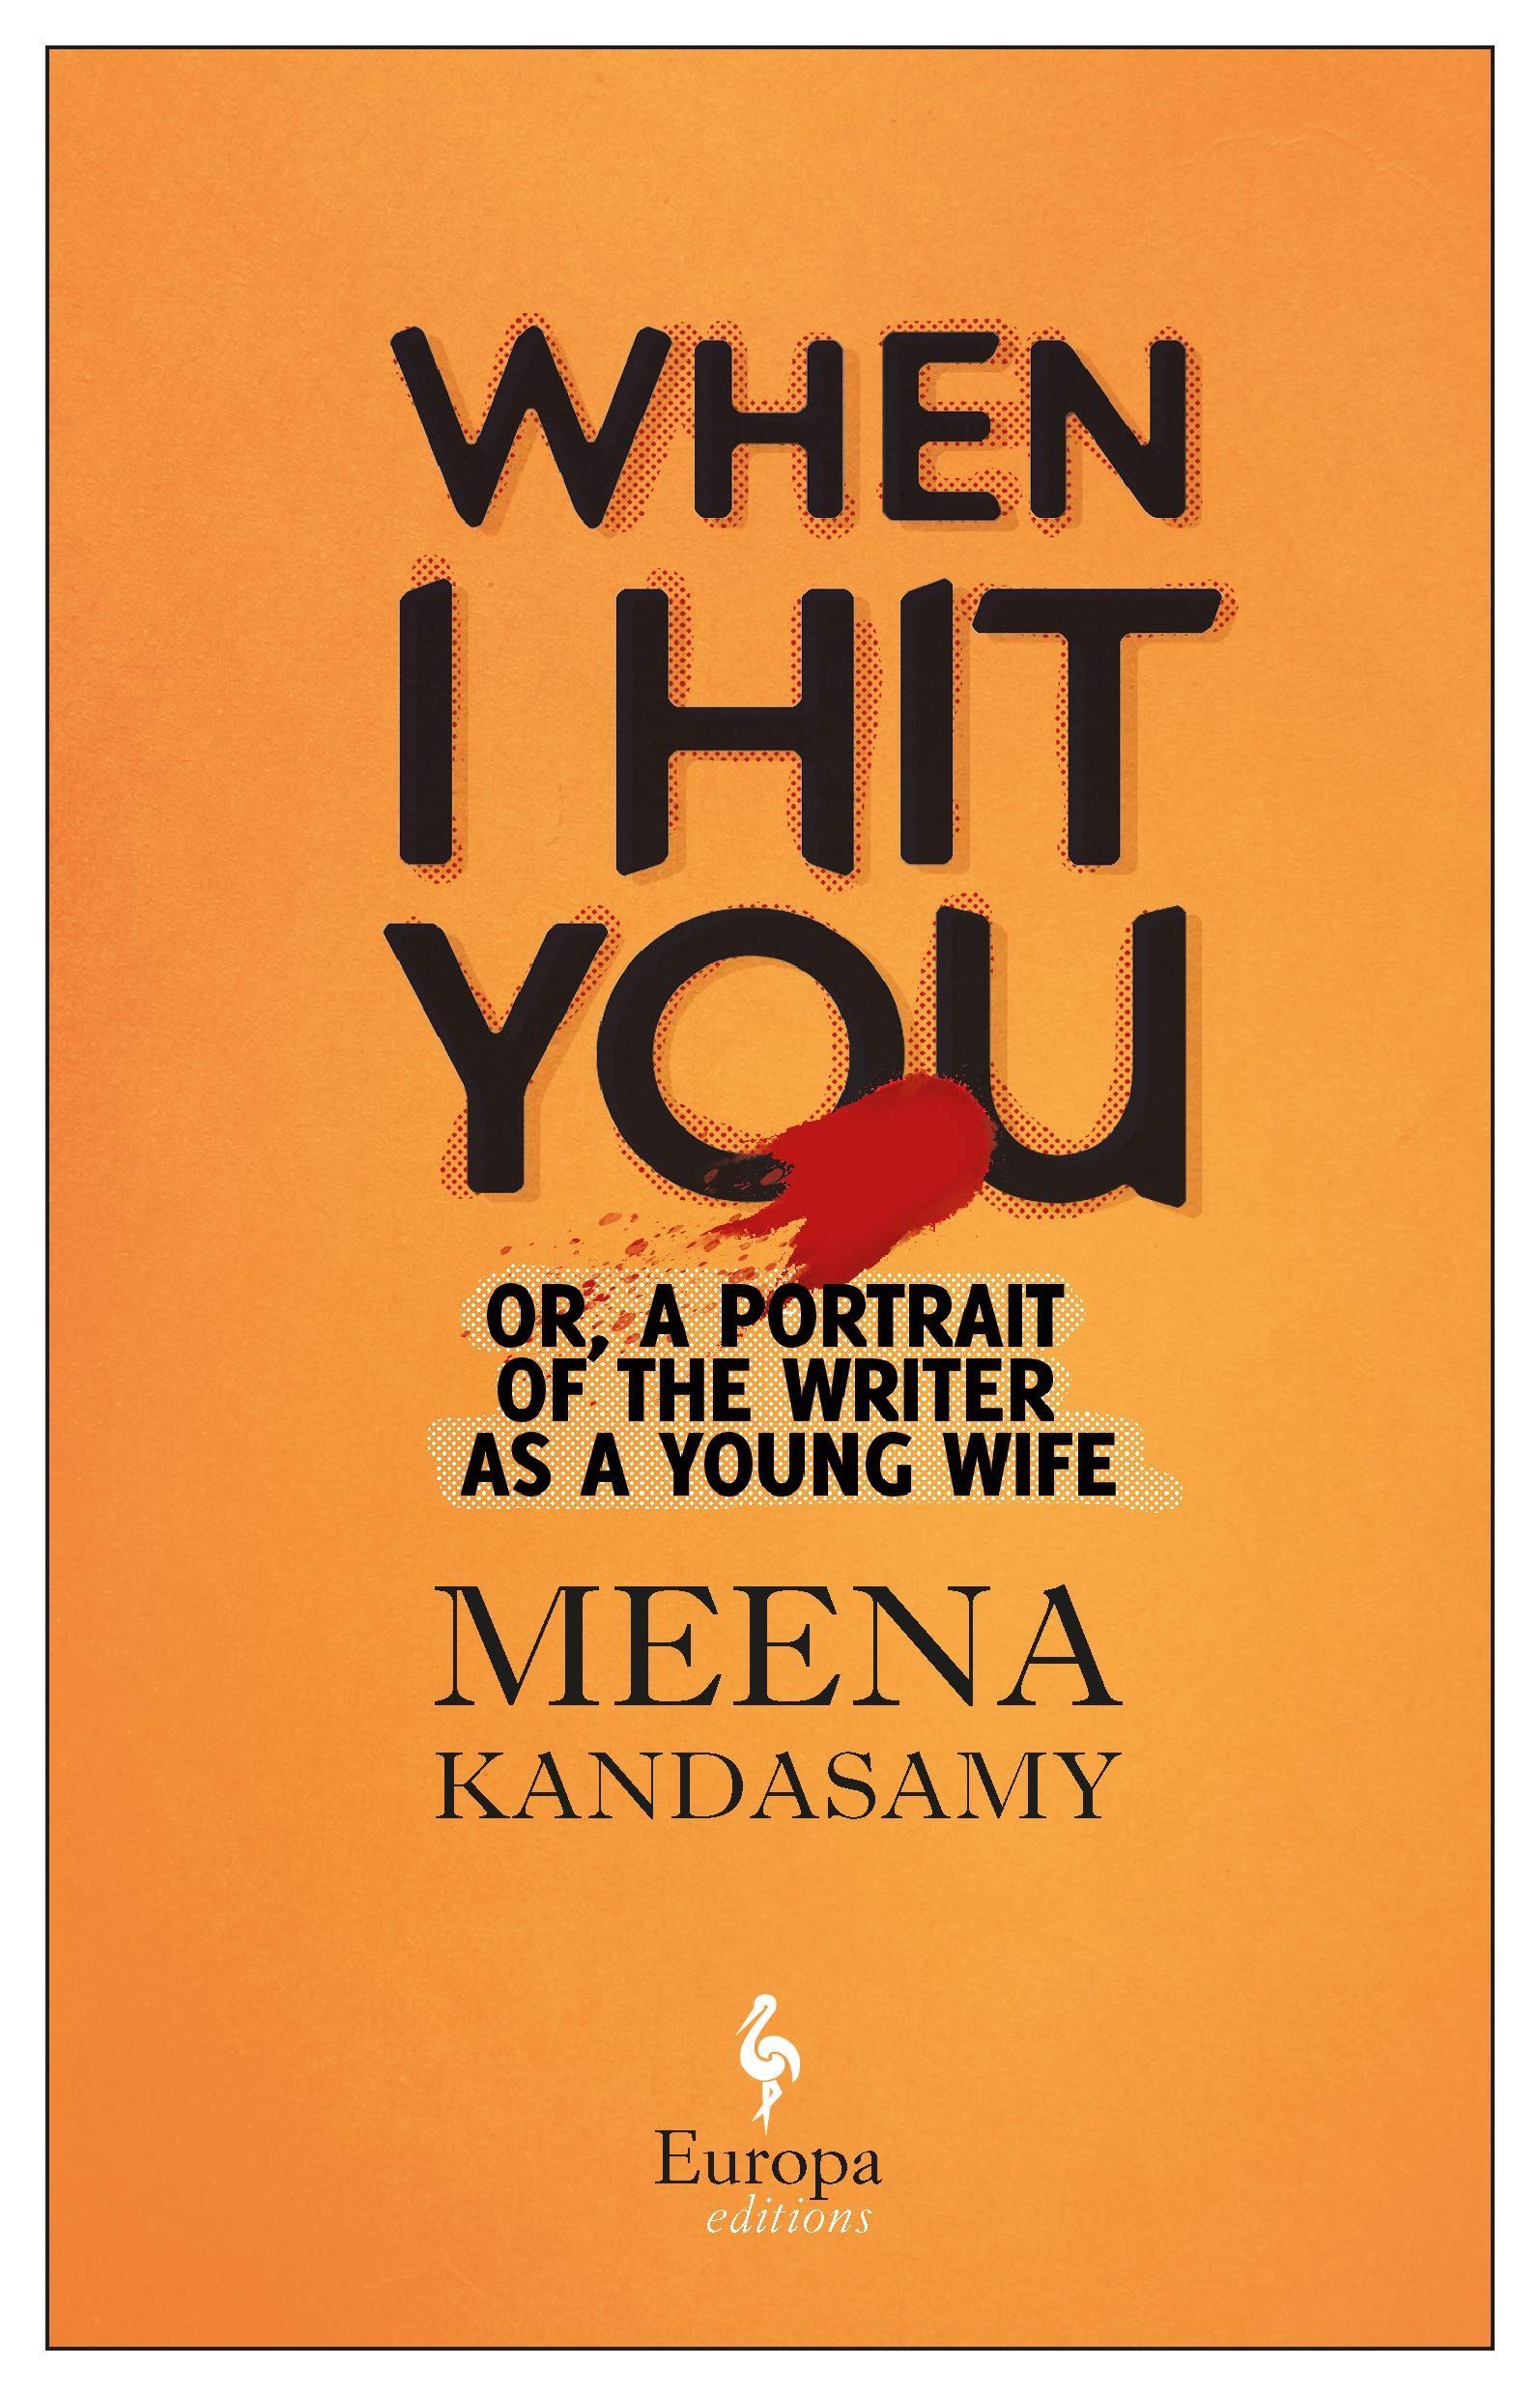 Sleight of Hand: On Meena Kandasamy’s “When I Hit You” and “Exquisite Cadavers”